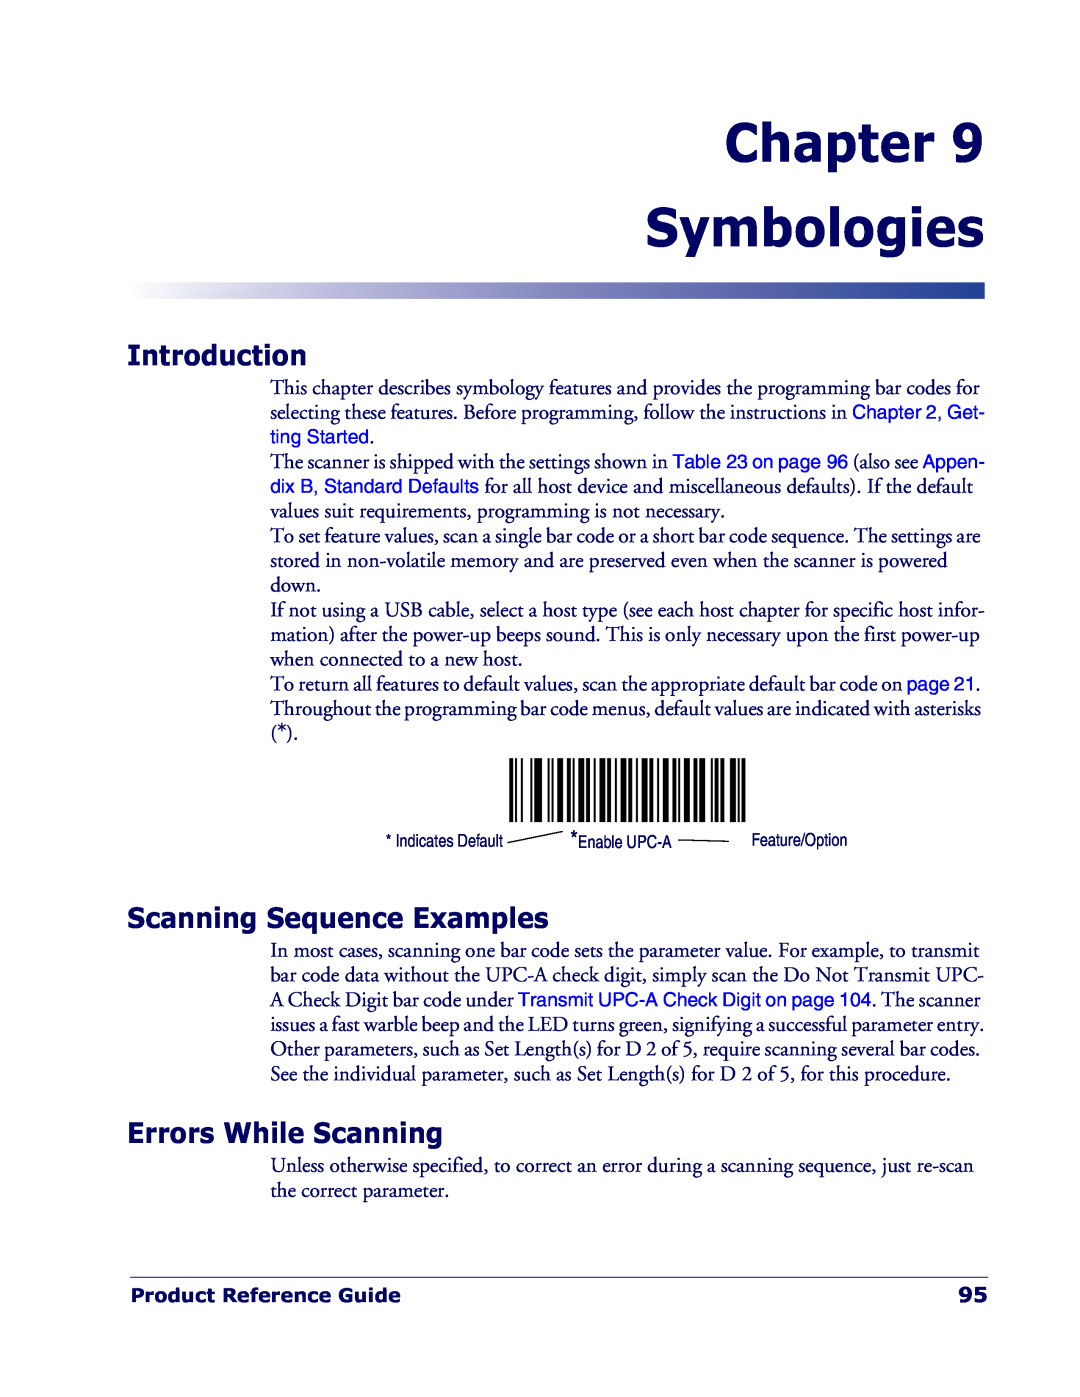 Datalogic Scanning QD 2300 manual Chapter Symbologies, Introduction, Scanning Sequence Examples, Errors While Scanning 